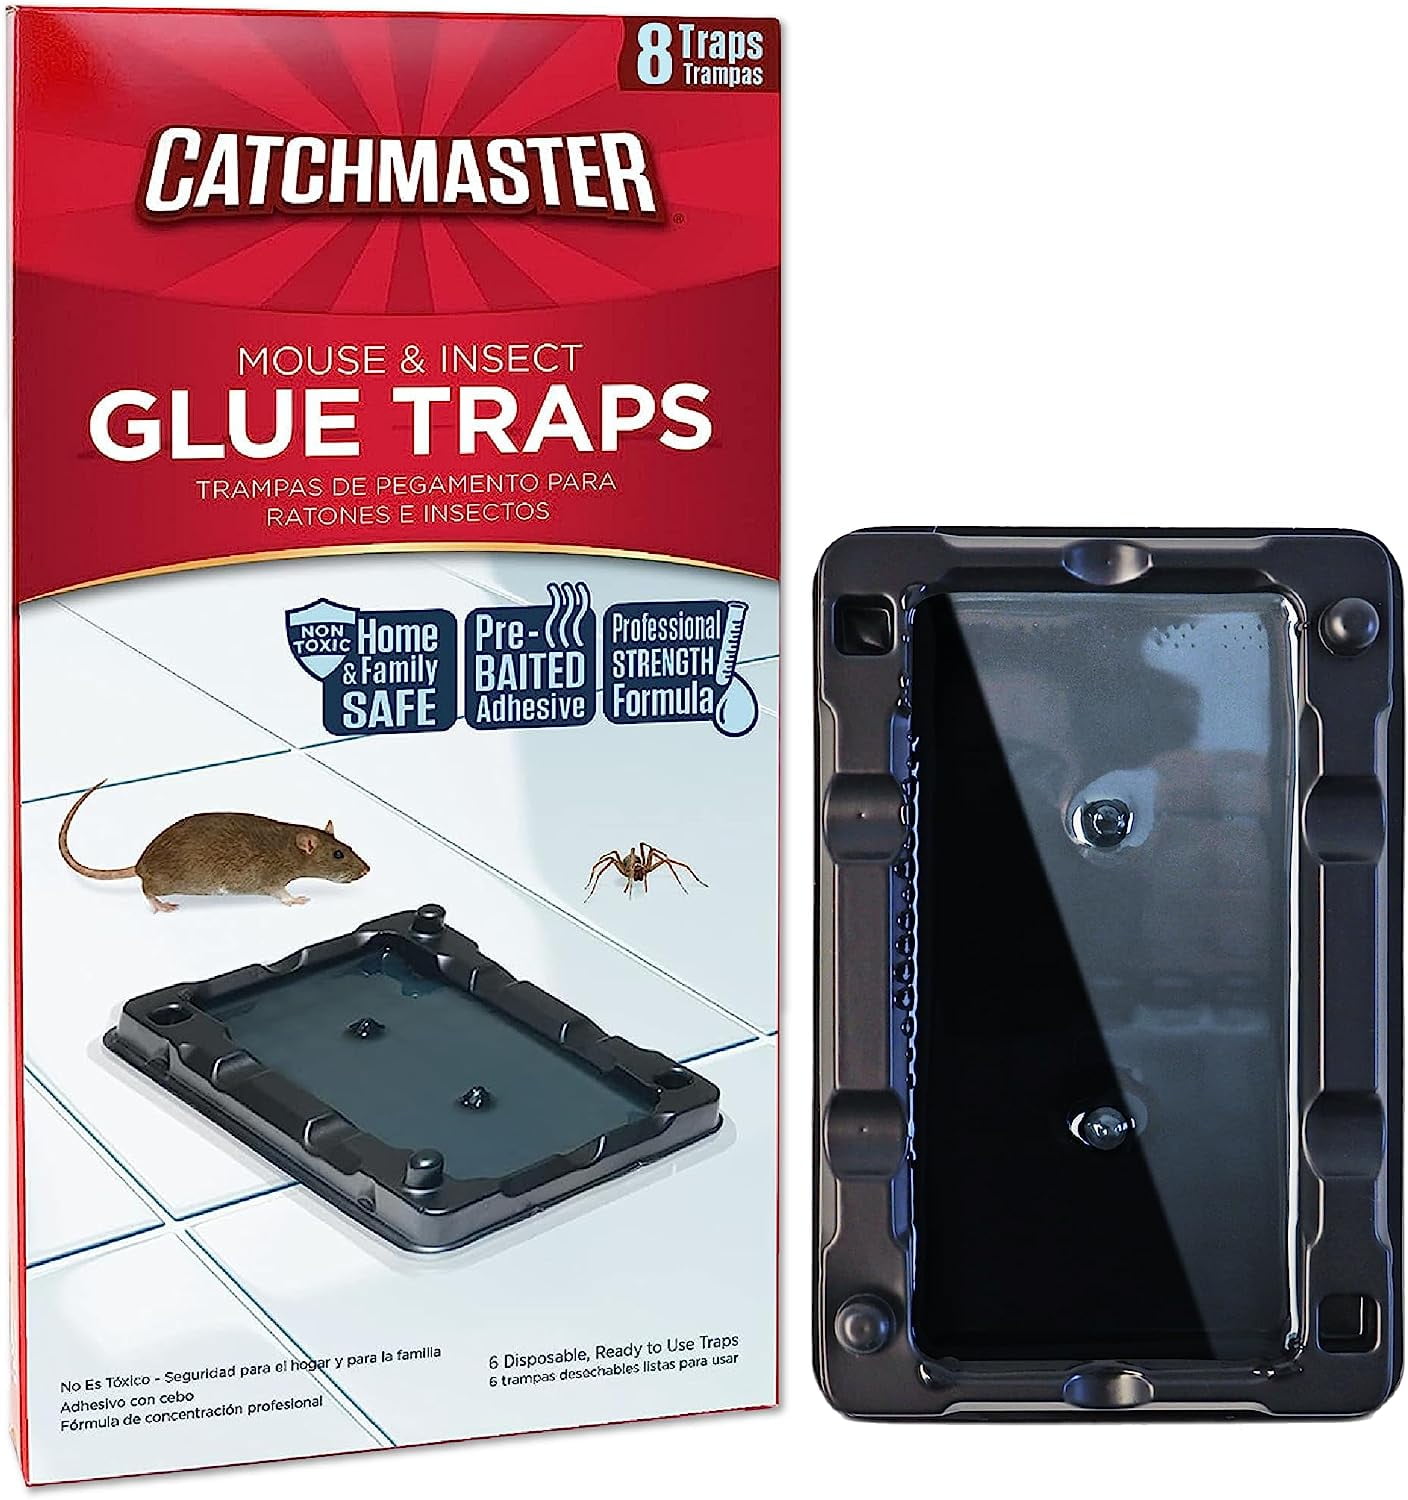 Kat Sense Sticky Rat Traps 'N Mouse Glue Traps That Work for Trapping  Snakes Spiders Roaches N Other Rodents, 2 XL Large Heavy Duty Clear Pre  Baited